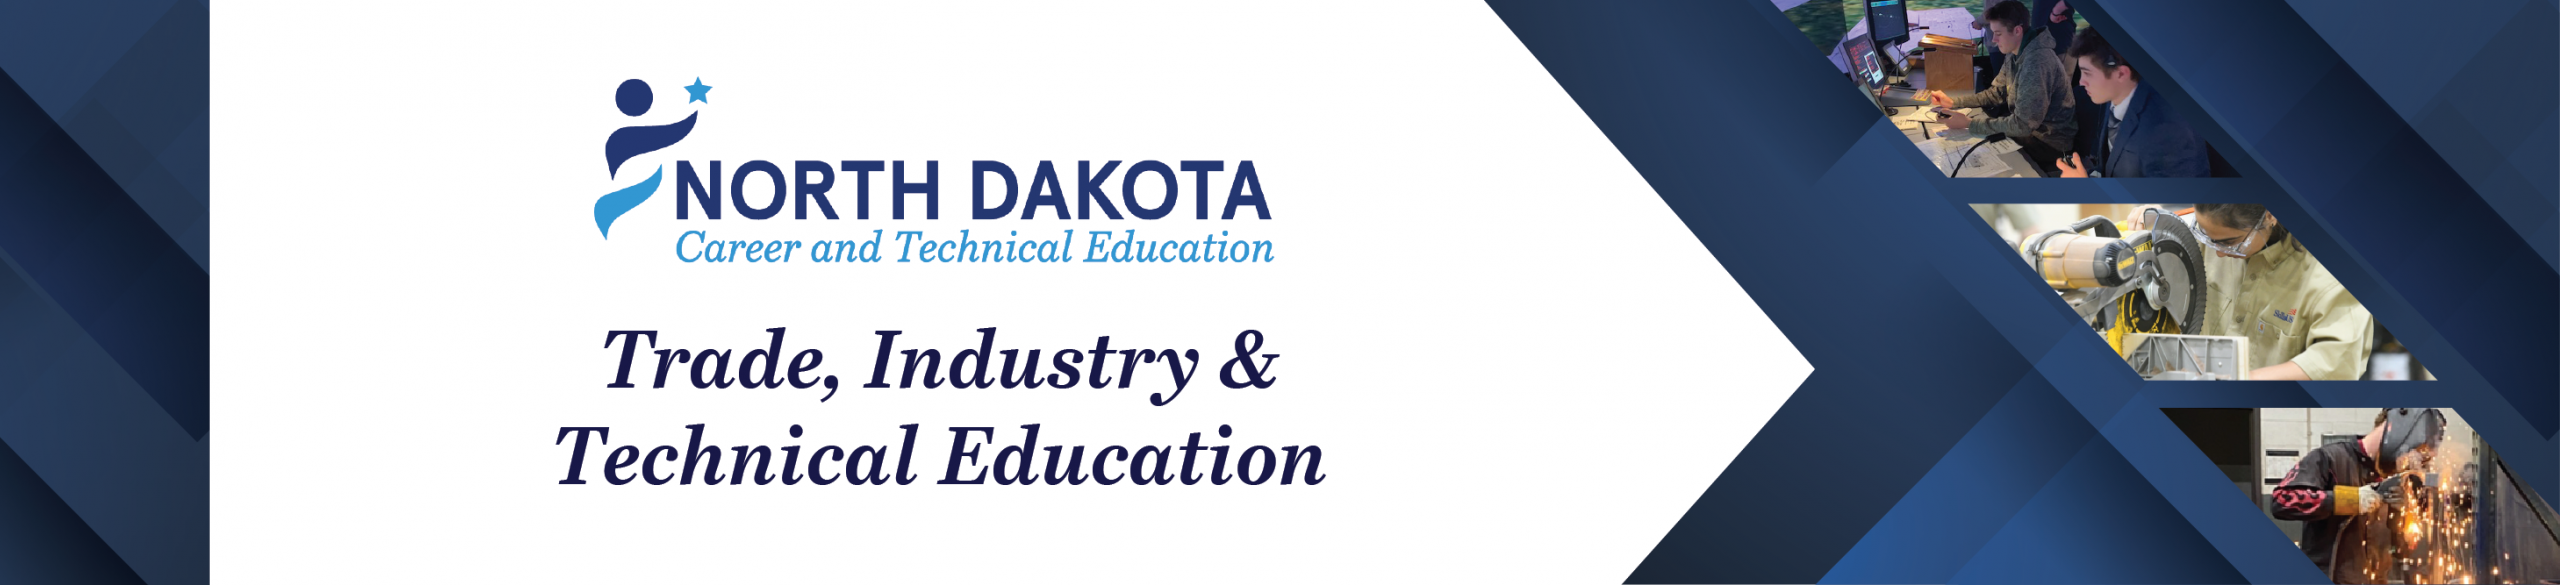 Trade, Industry & Technical Education Banner with Images